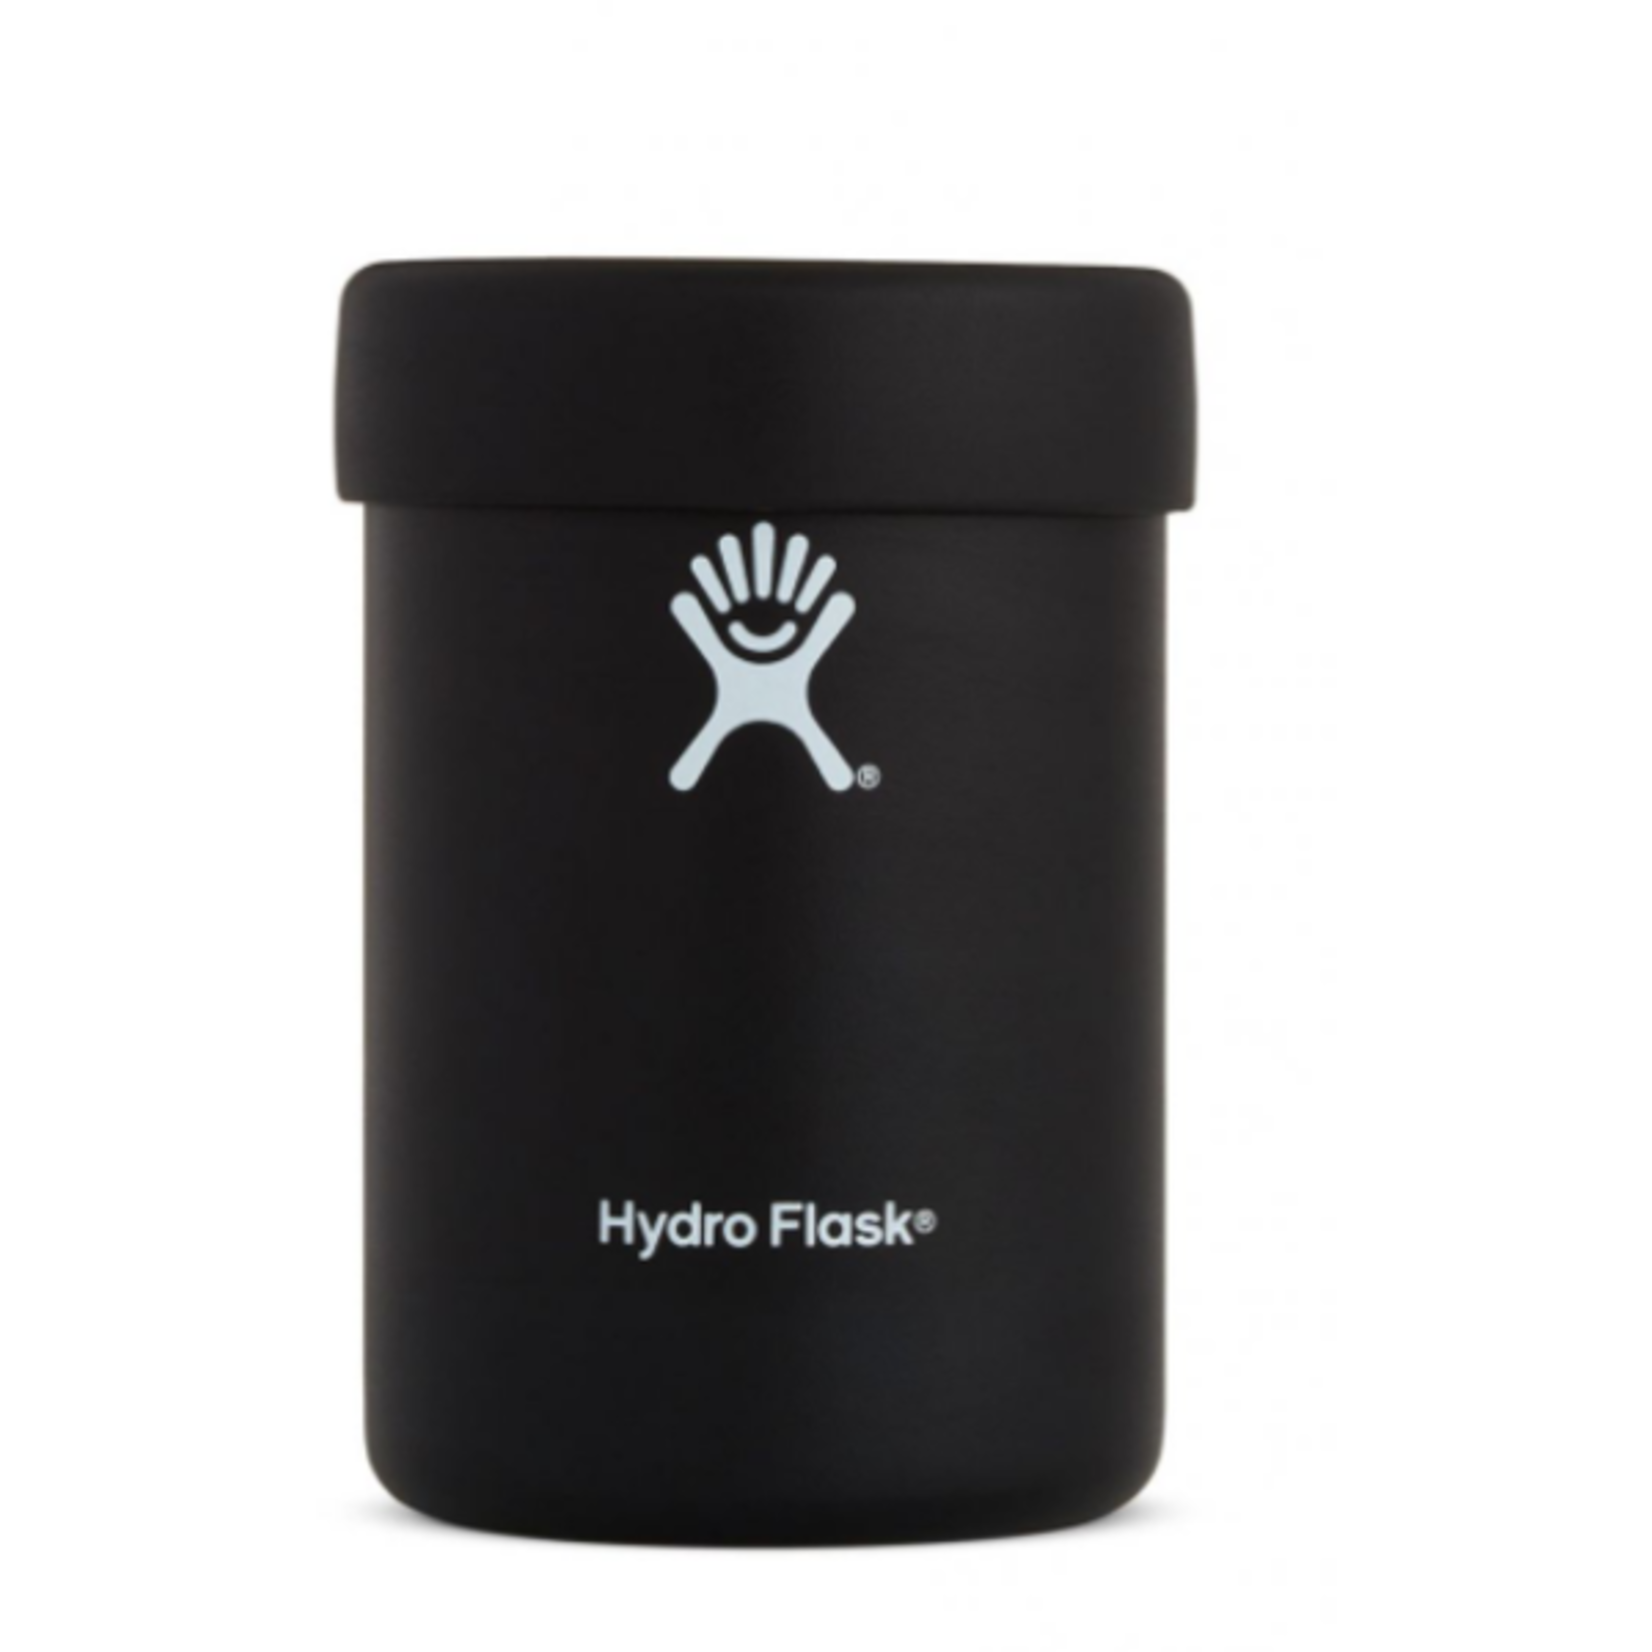 HYDROFLASK Hydro Flask 12 OZ Cooler Cup